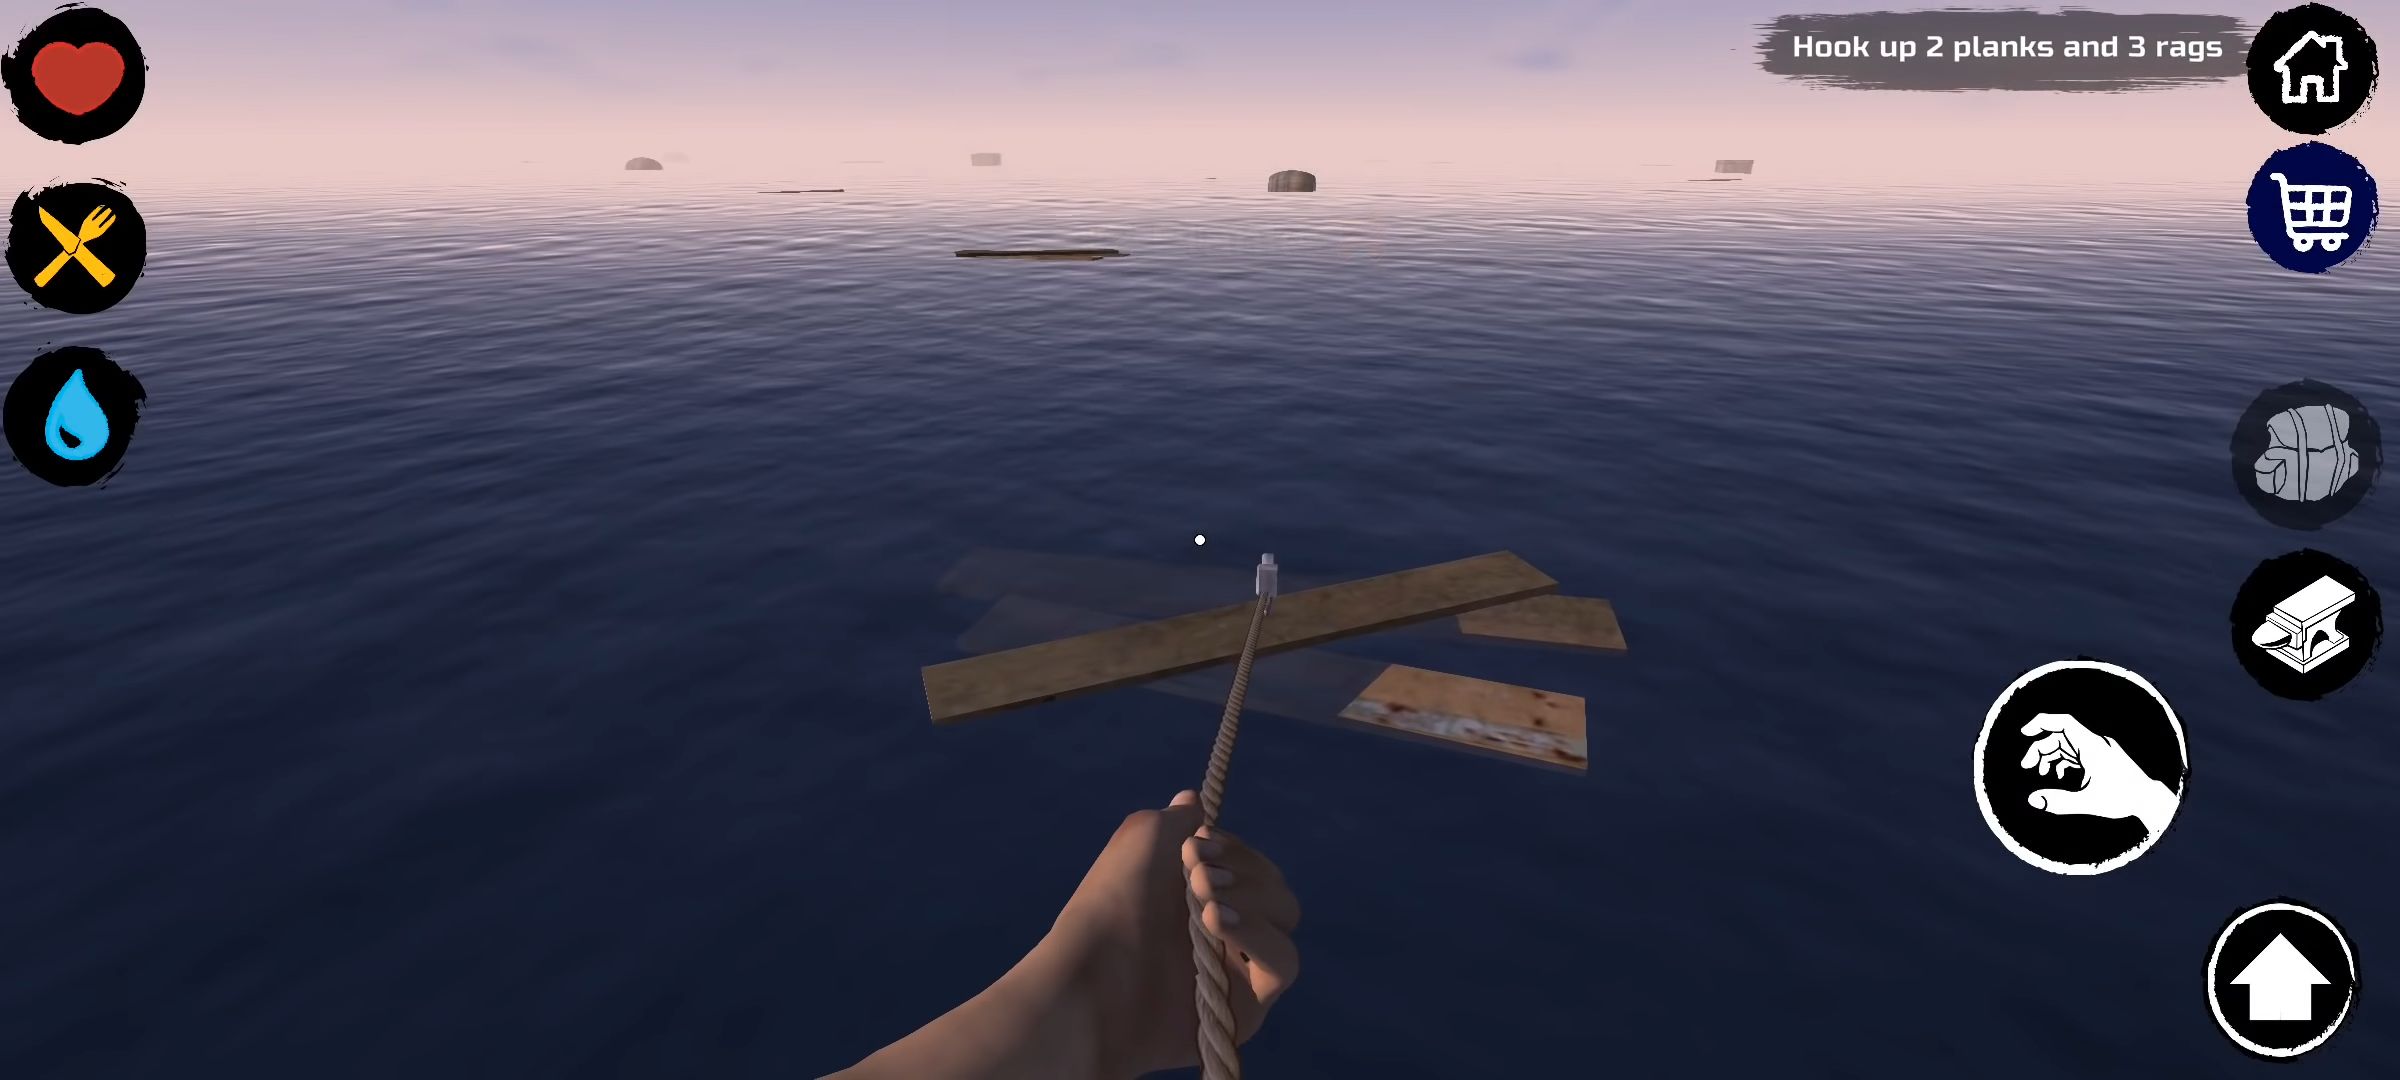 Download Survival and Craft: Crafting In The Ocean für Android kostenlos.